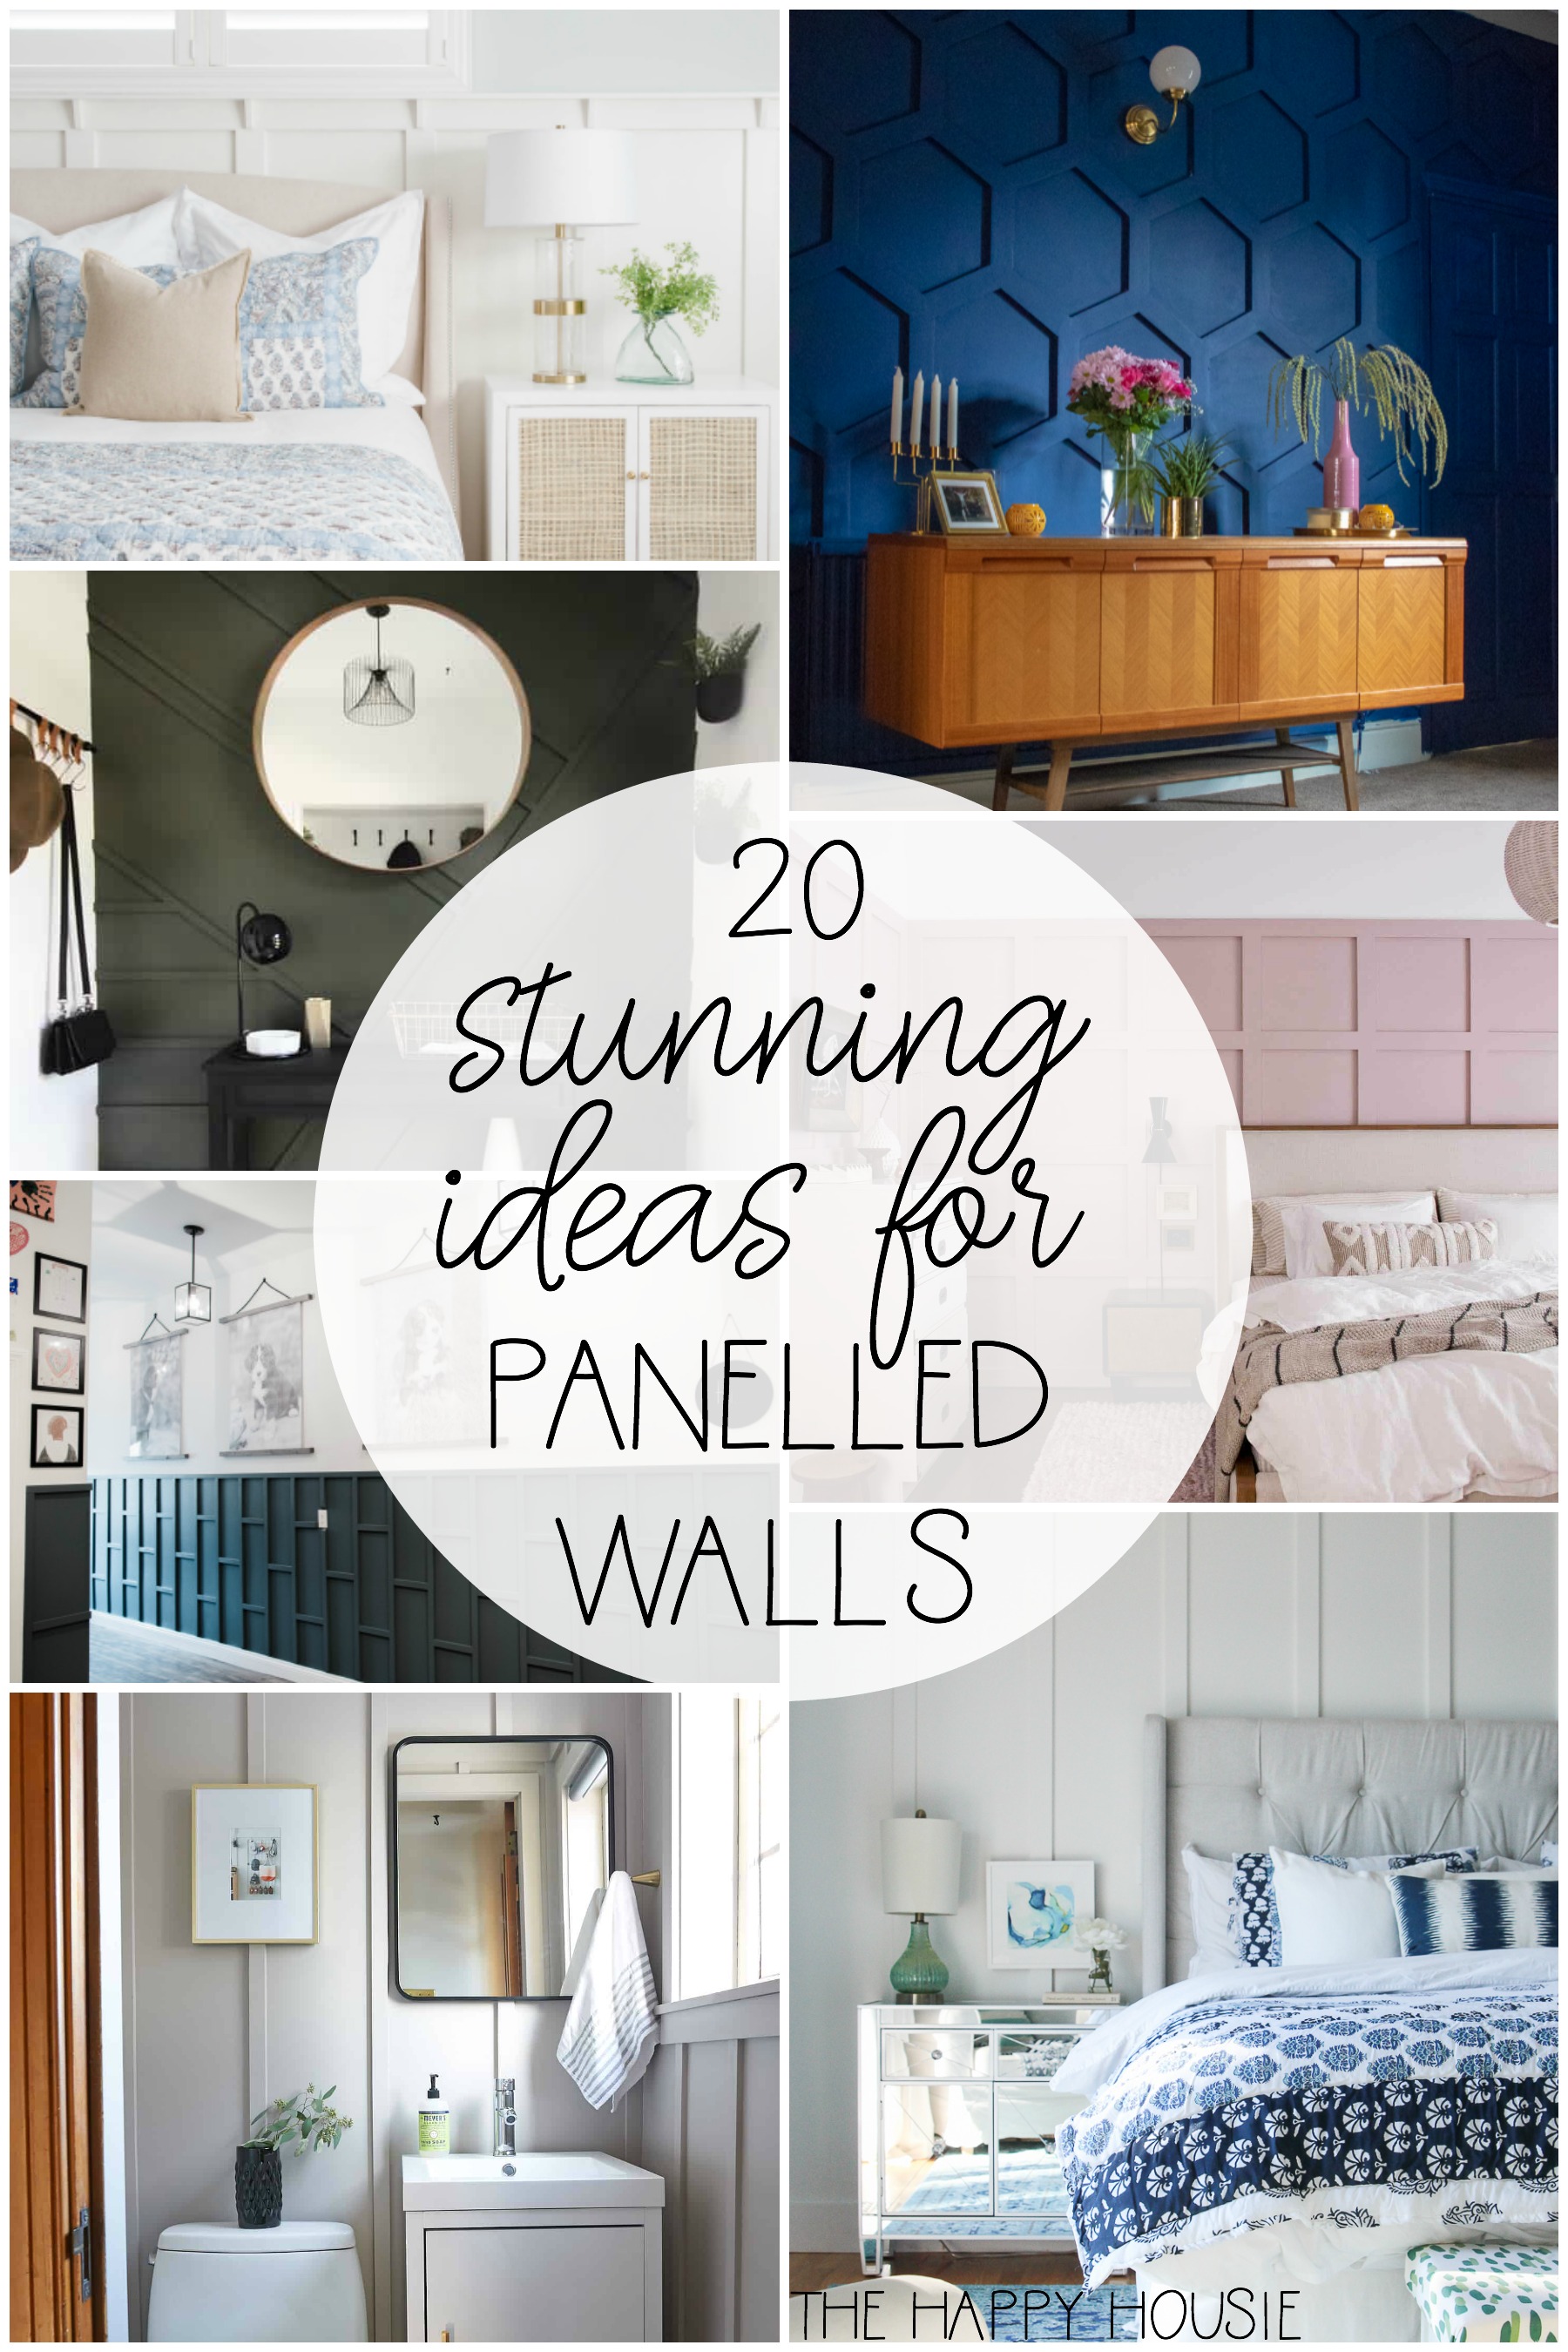 20 Stunning ideas for panelled walls poster.